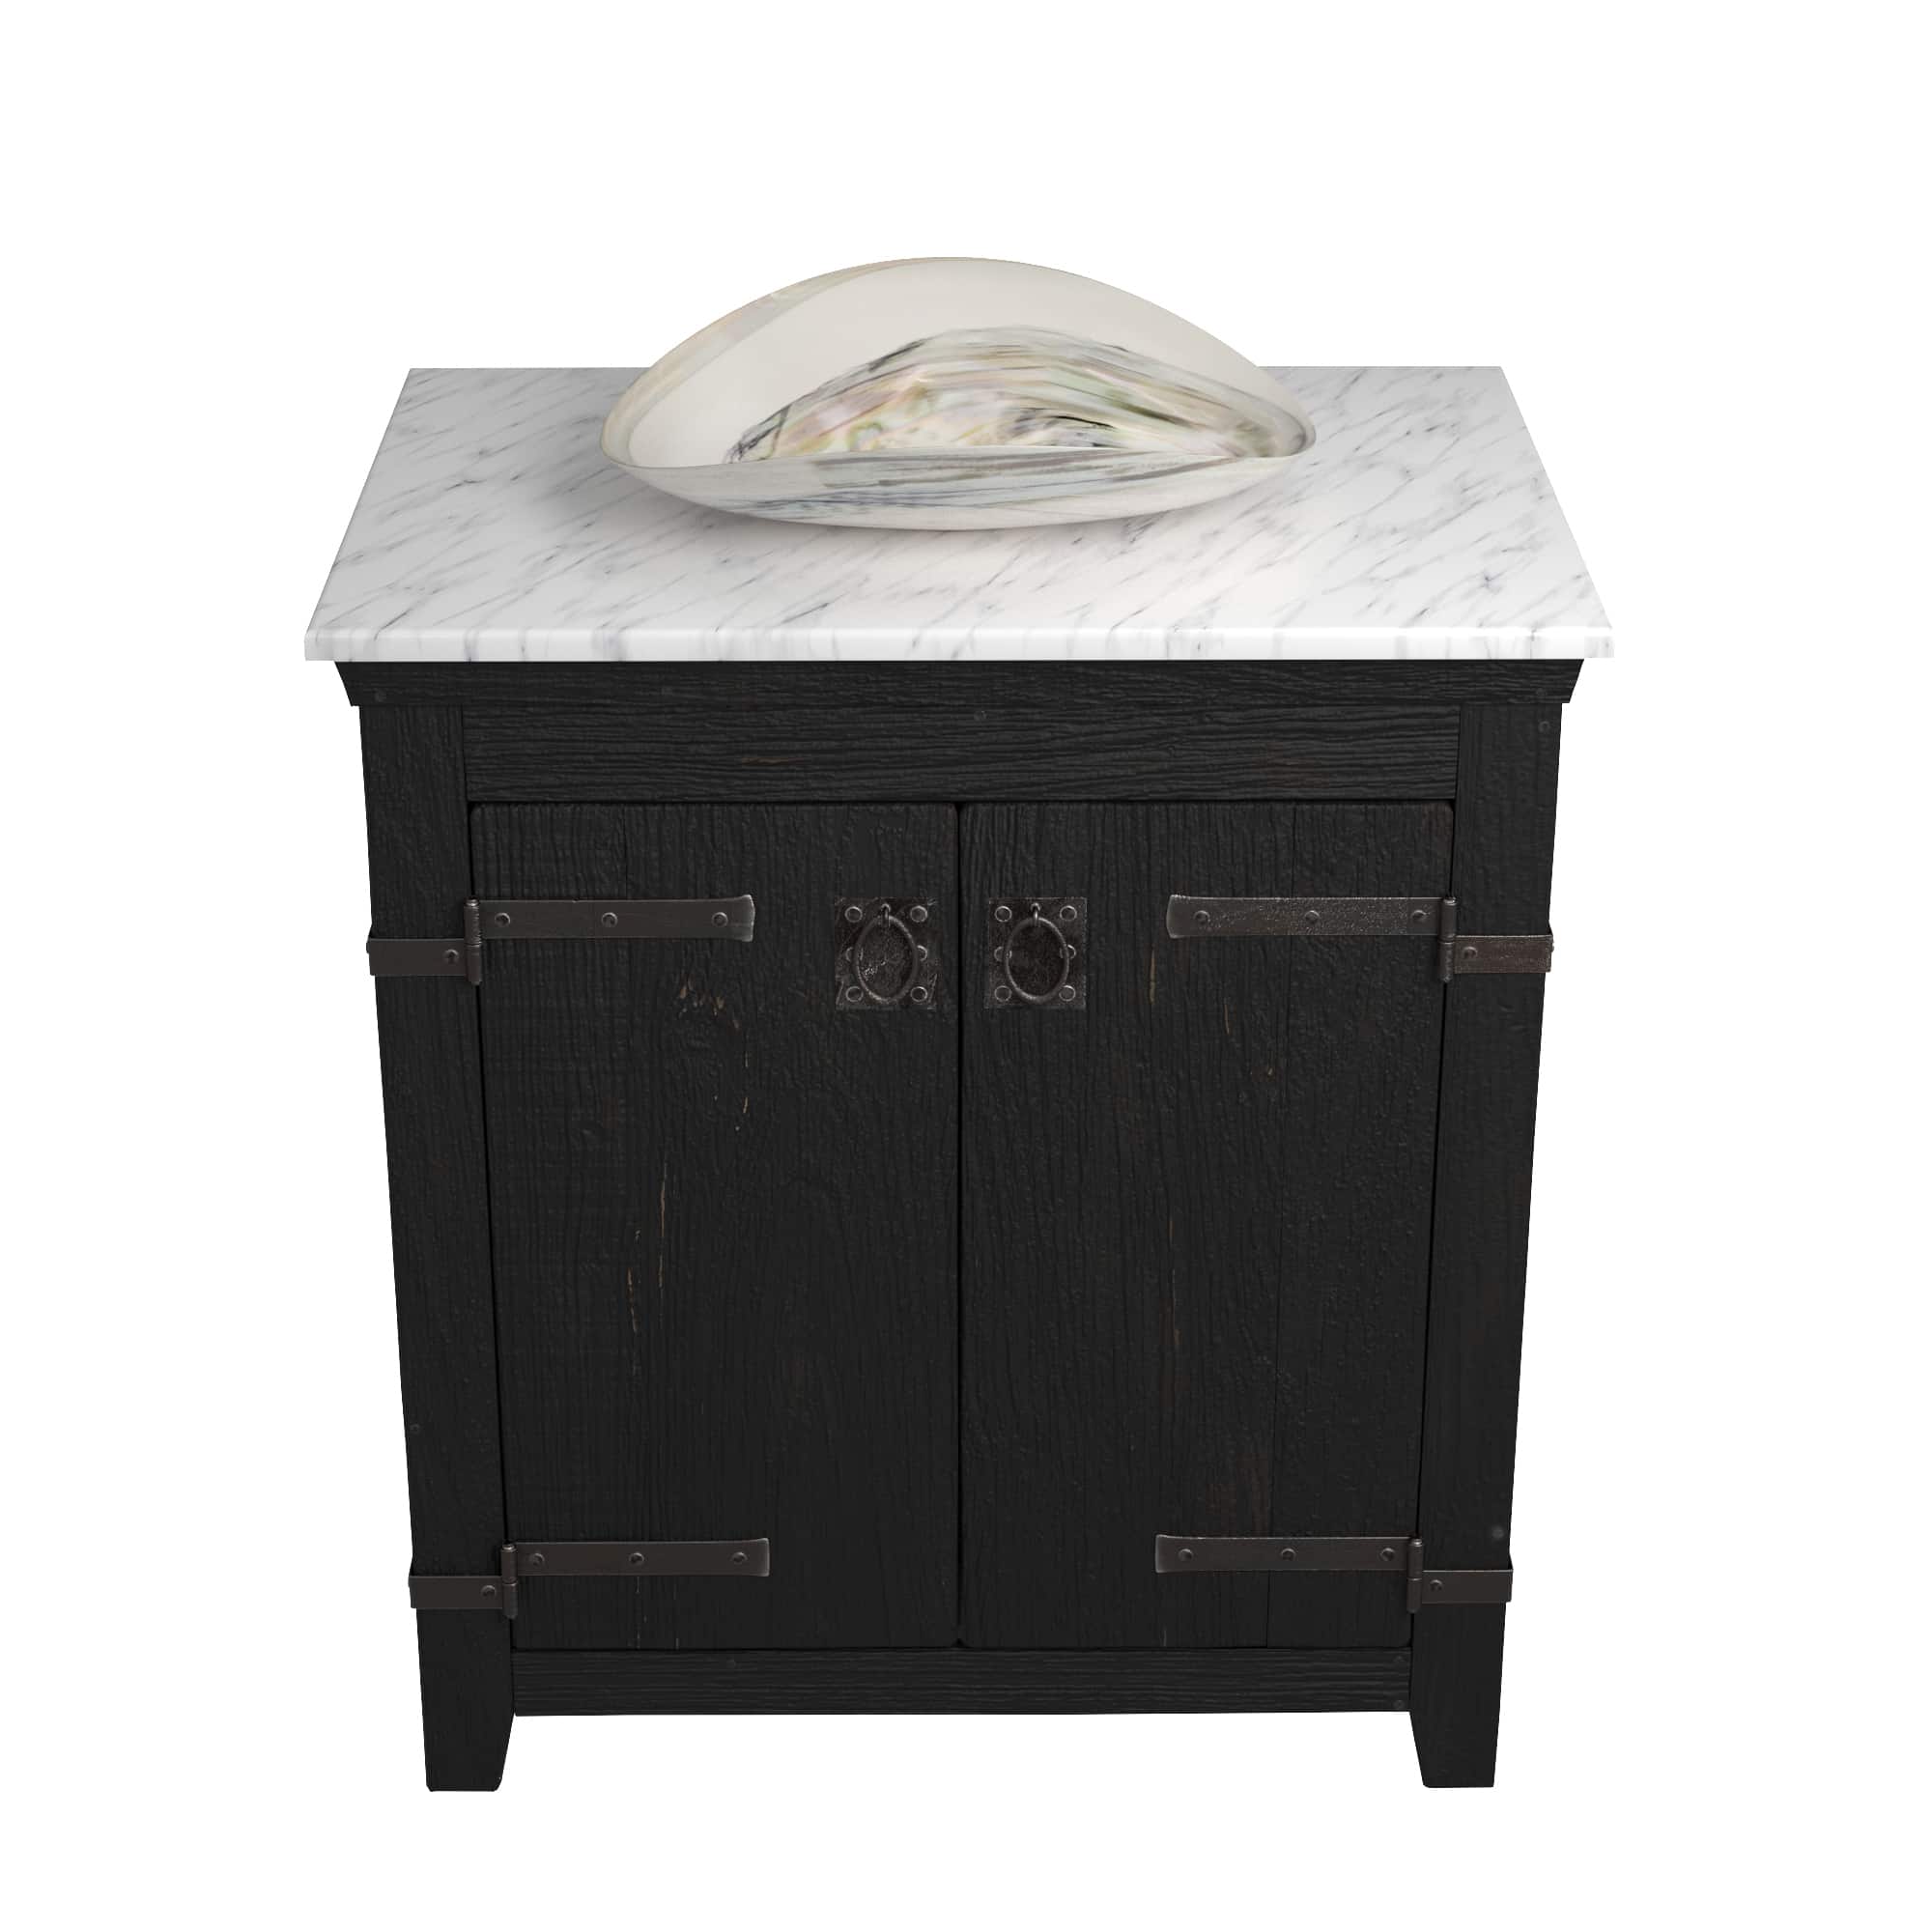 Native Trails 30" Americana Vanity in Anvil with Carrara Marble Top and Sorrento in Abalone, No Faucet Hole, BND30-VB-CT-MG-094